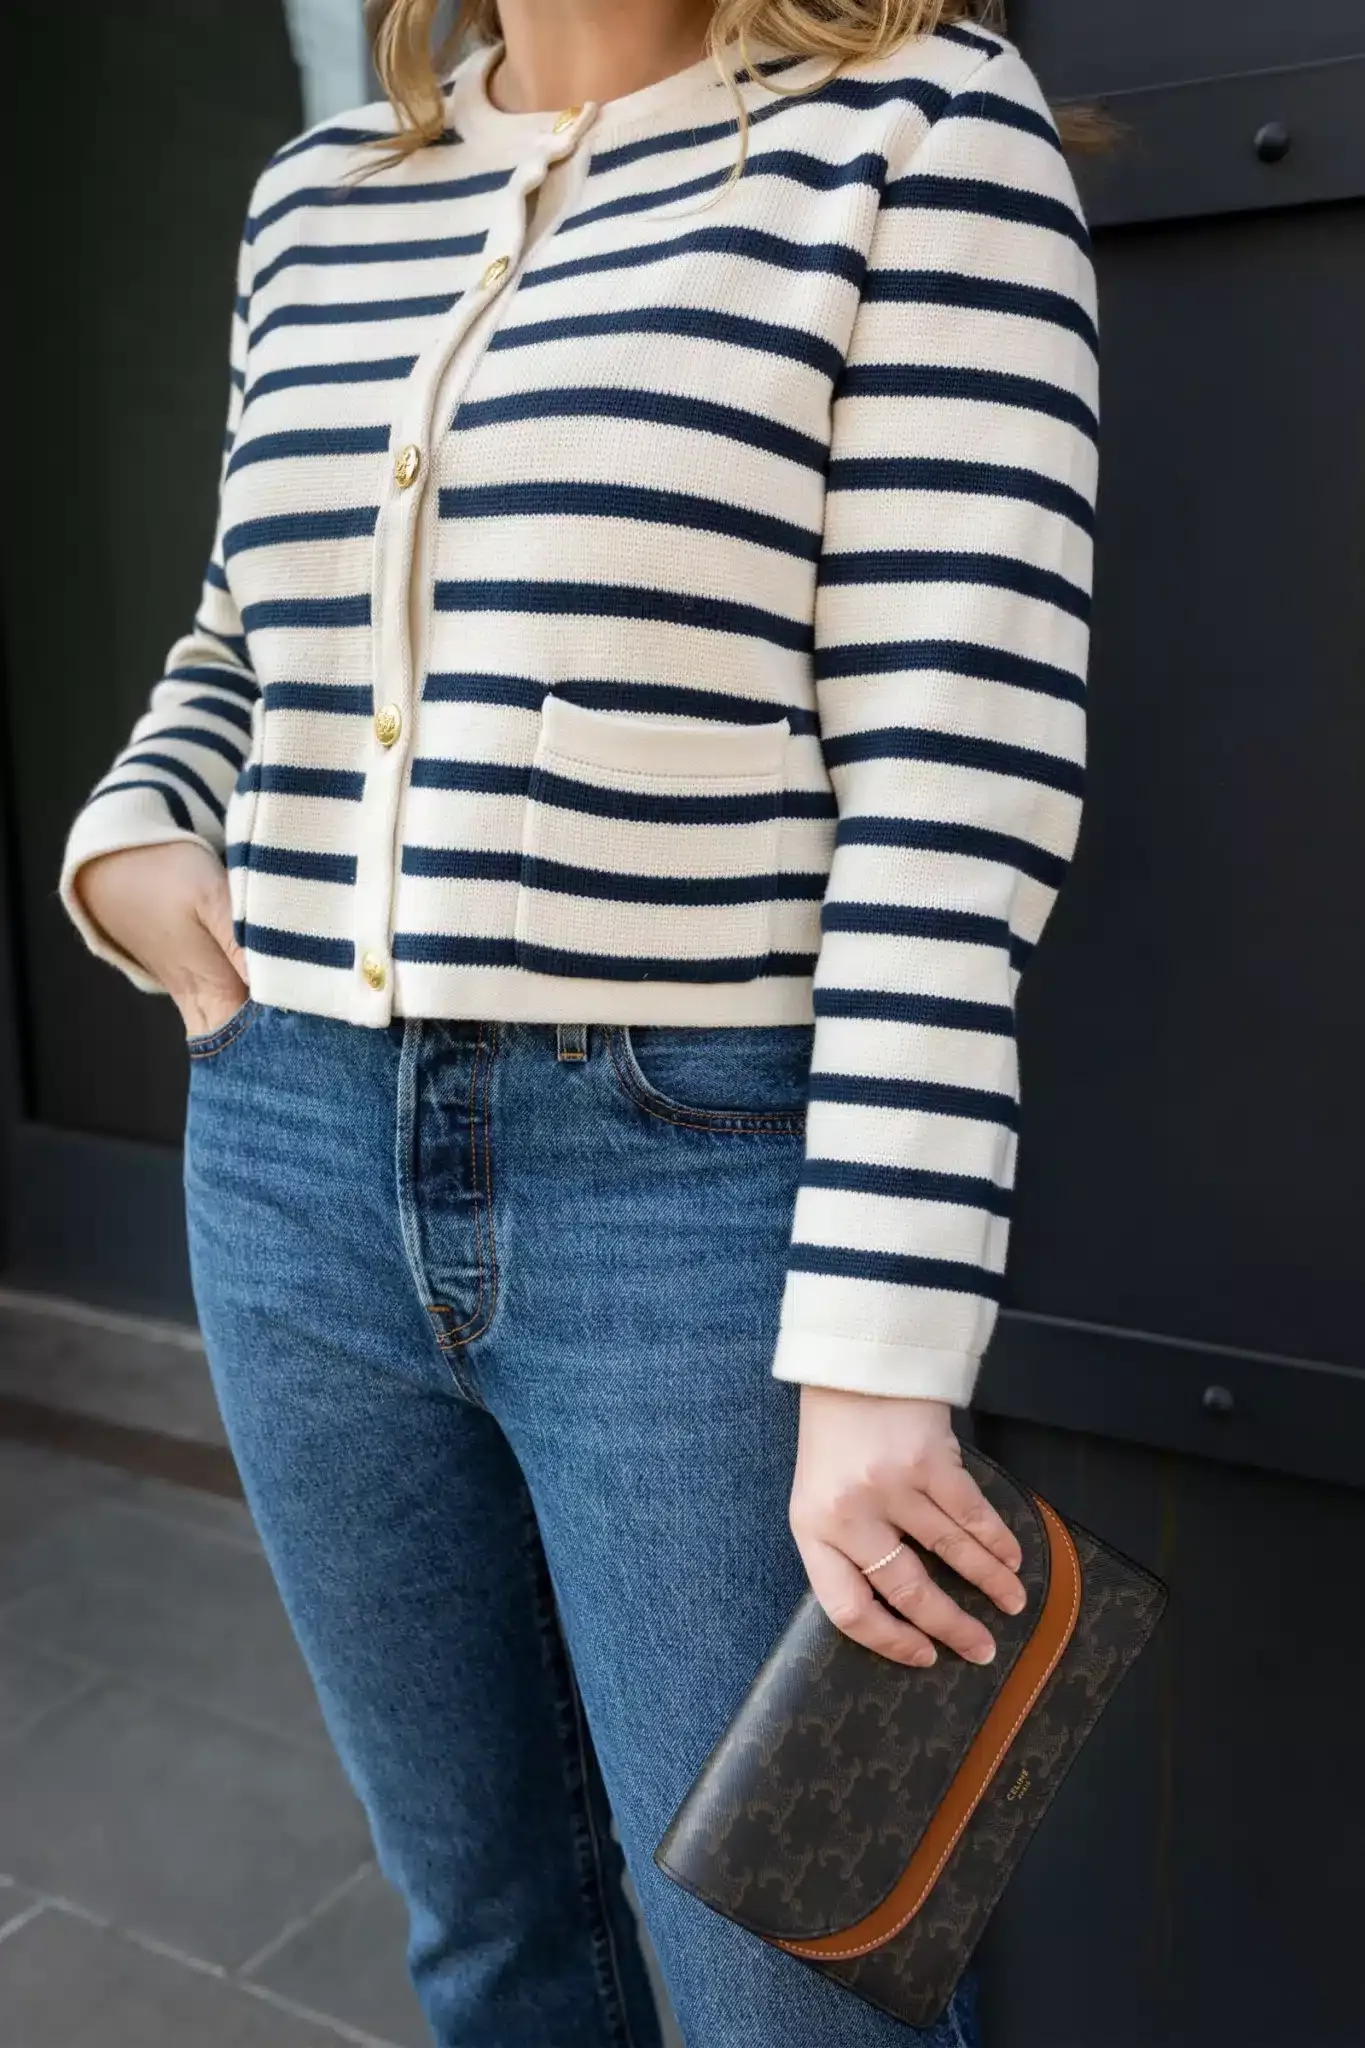 J.Crew Lady Jacket Stripes Spring Outfit